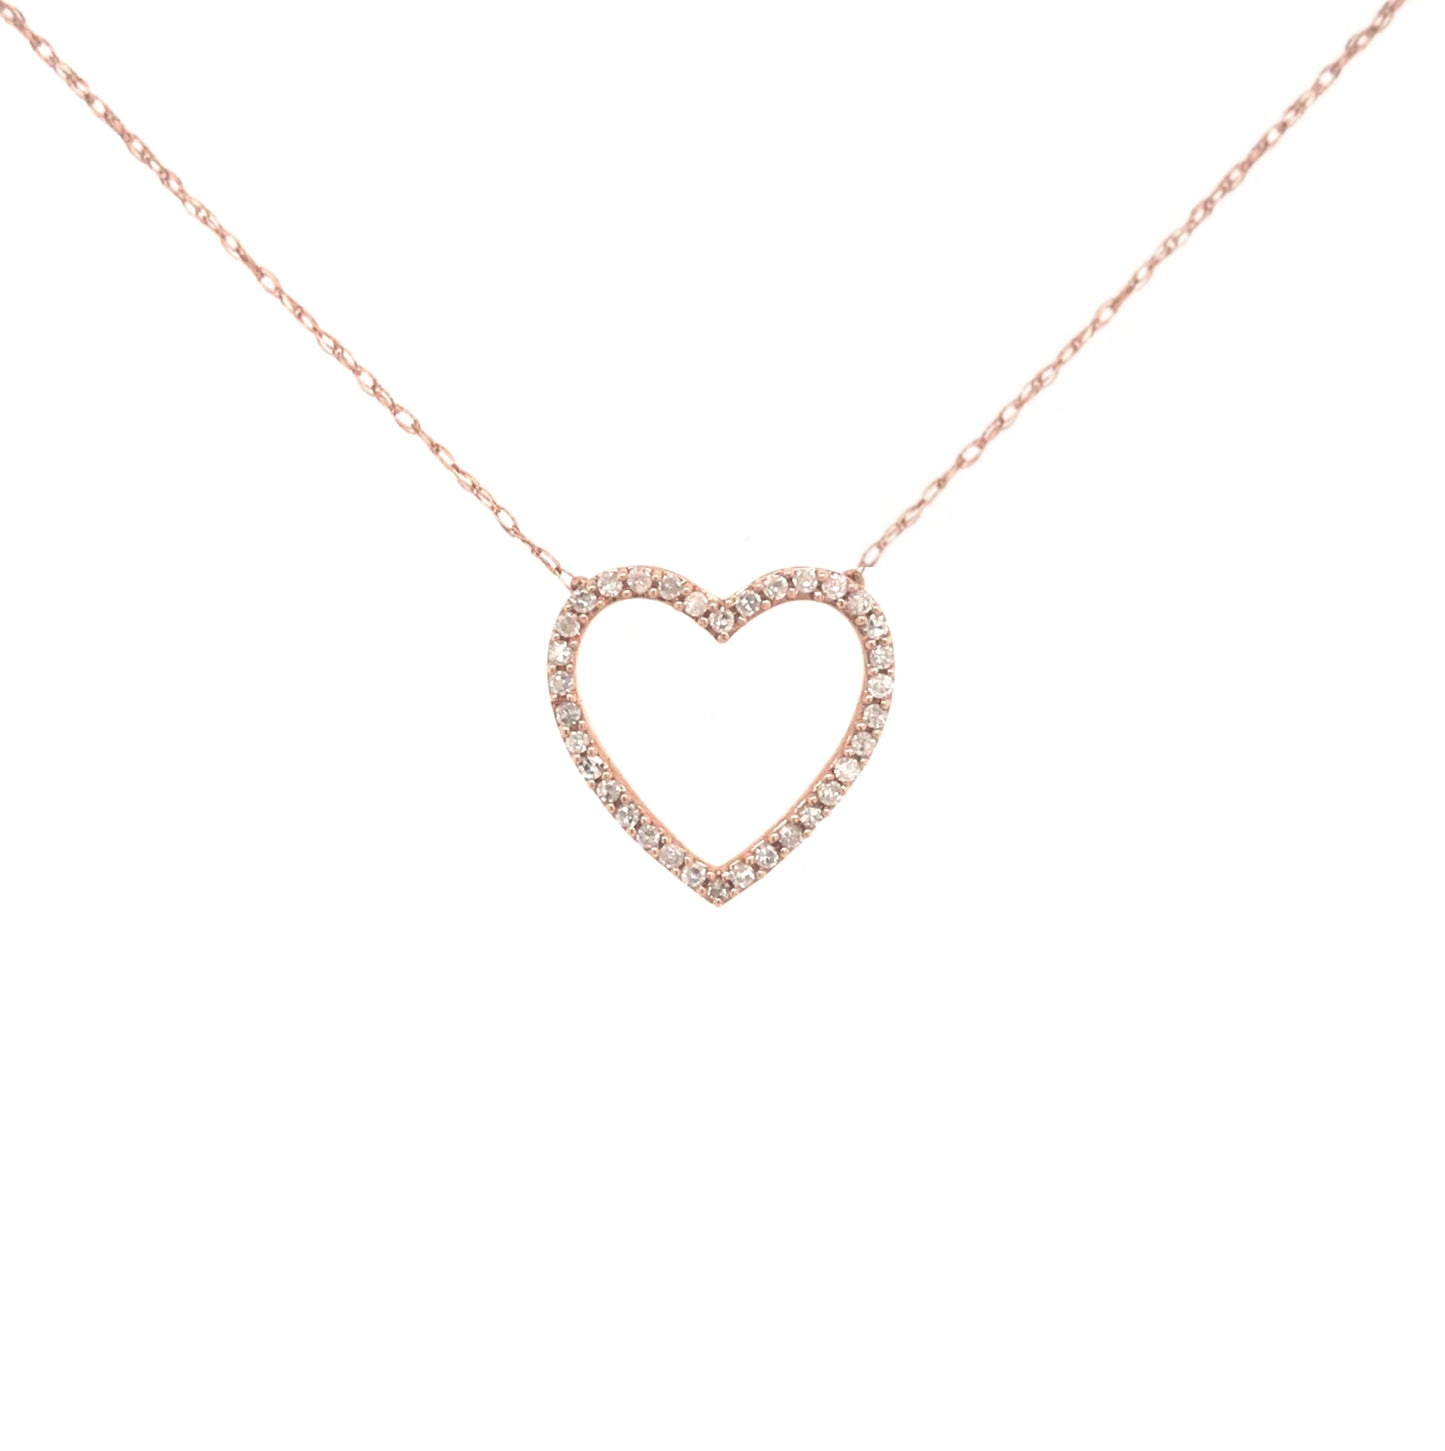 10K Rose Gold And Diamond Heart Necklace - HK Jewels